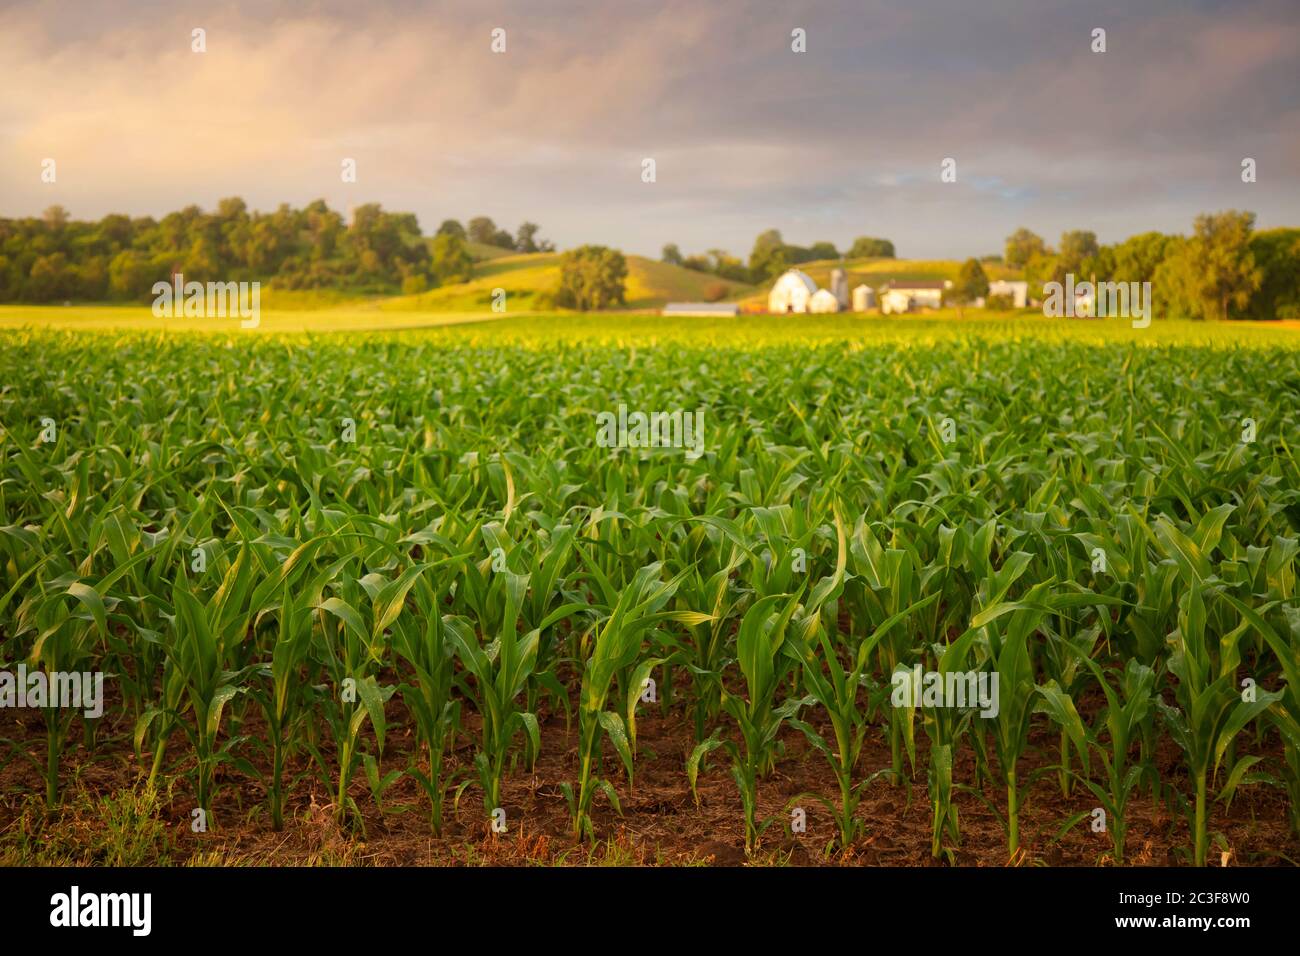 Selective focus early morning view of young corn and a farm on a rainy day Stock Photo